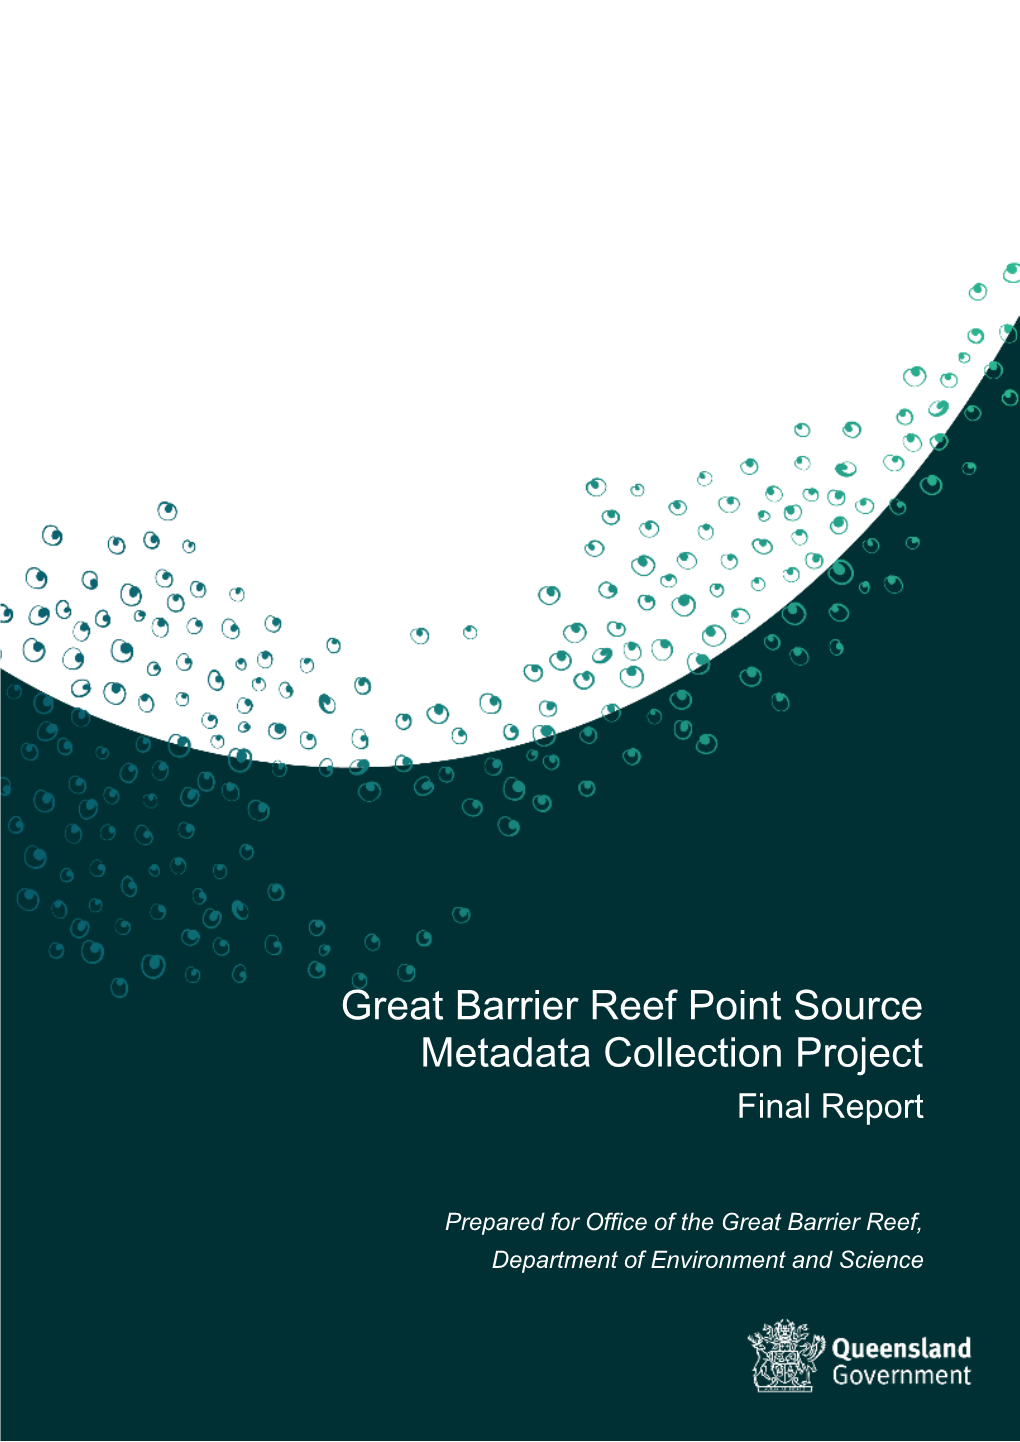 Great Barrier Reef Point Source Metadata Collection Project Final Report